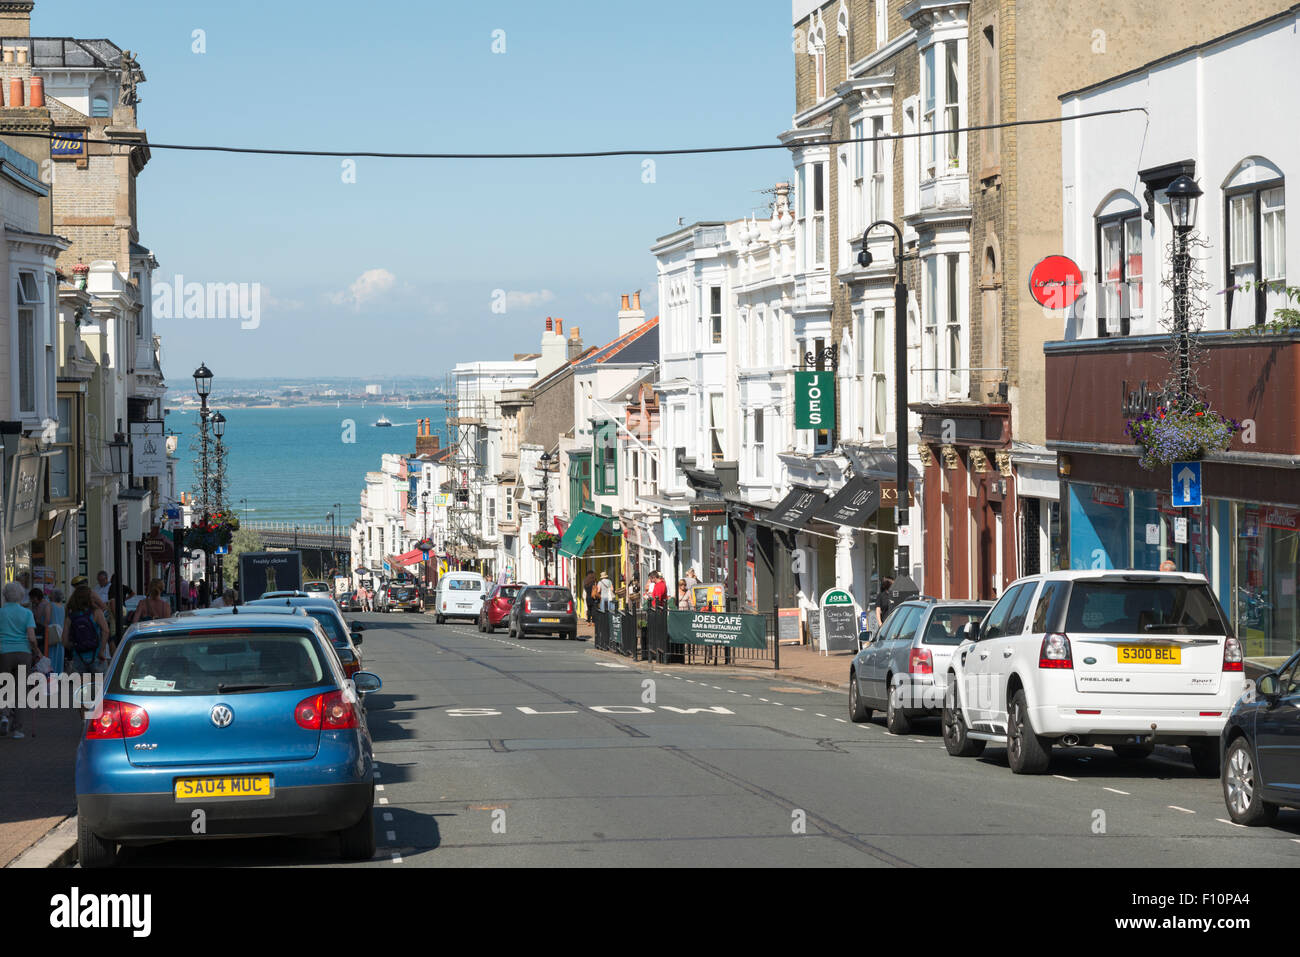 Shops in Union Street, Ryde, Isle of Wight UK in summer, with cars parked on the road. Stock Photo